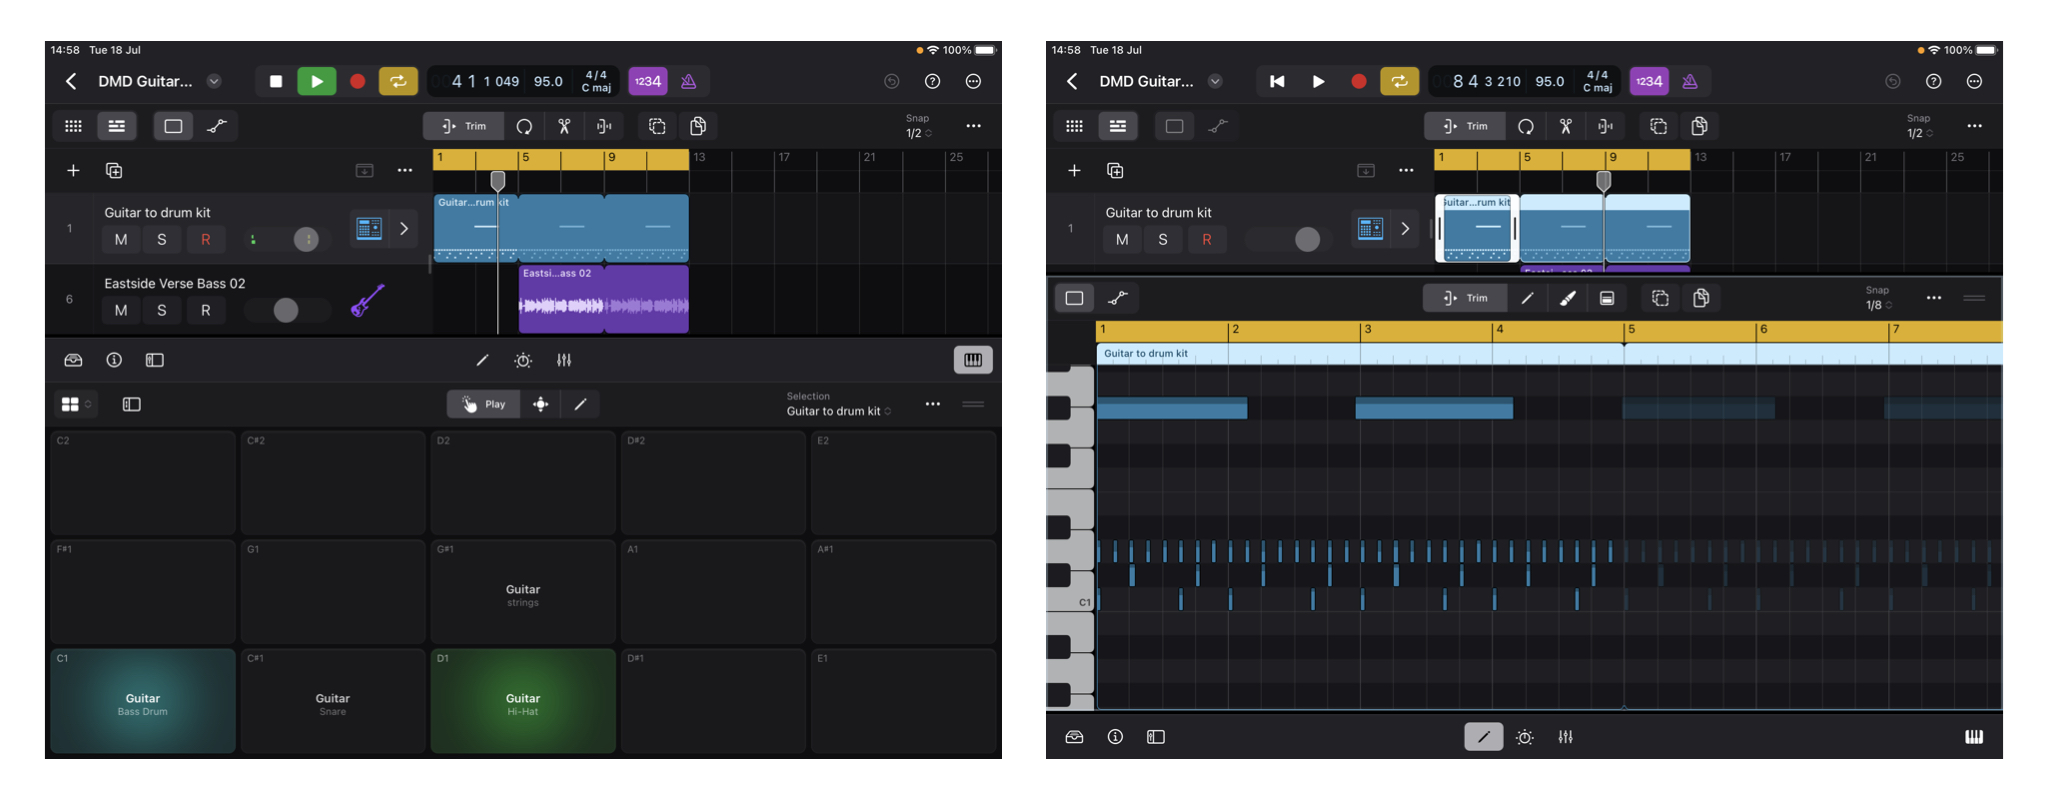 2 screenshots from Logic Pro for iPad, showing the Drum Machine Designer playable pads and editor.